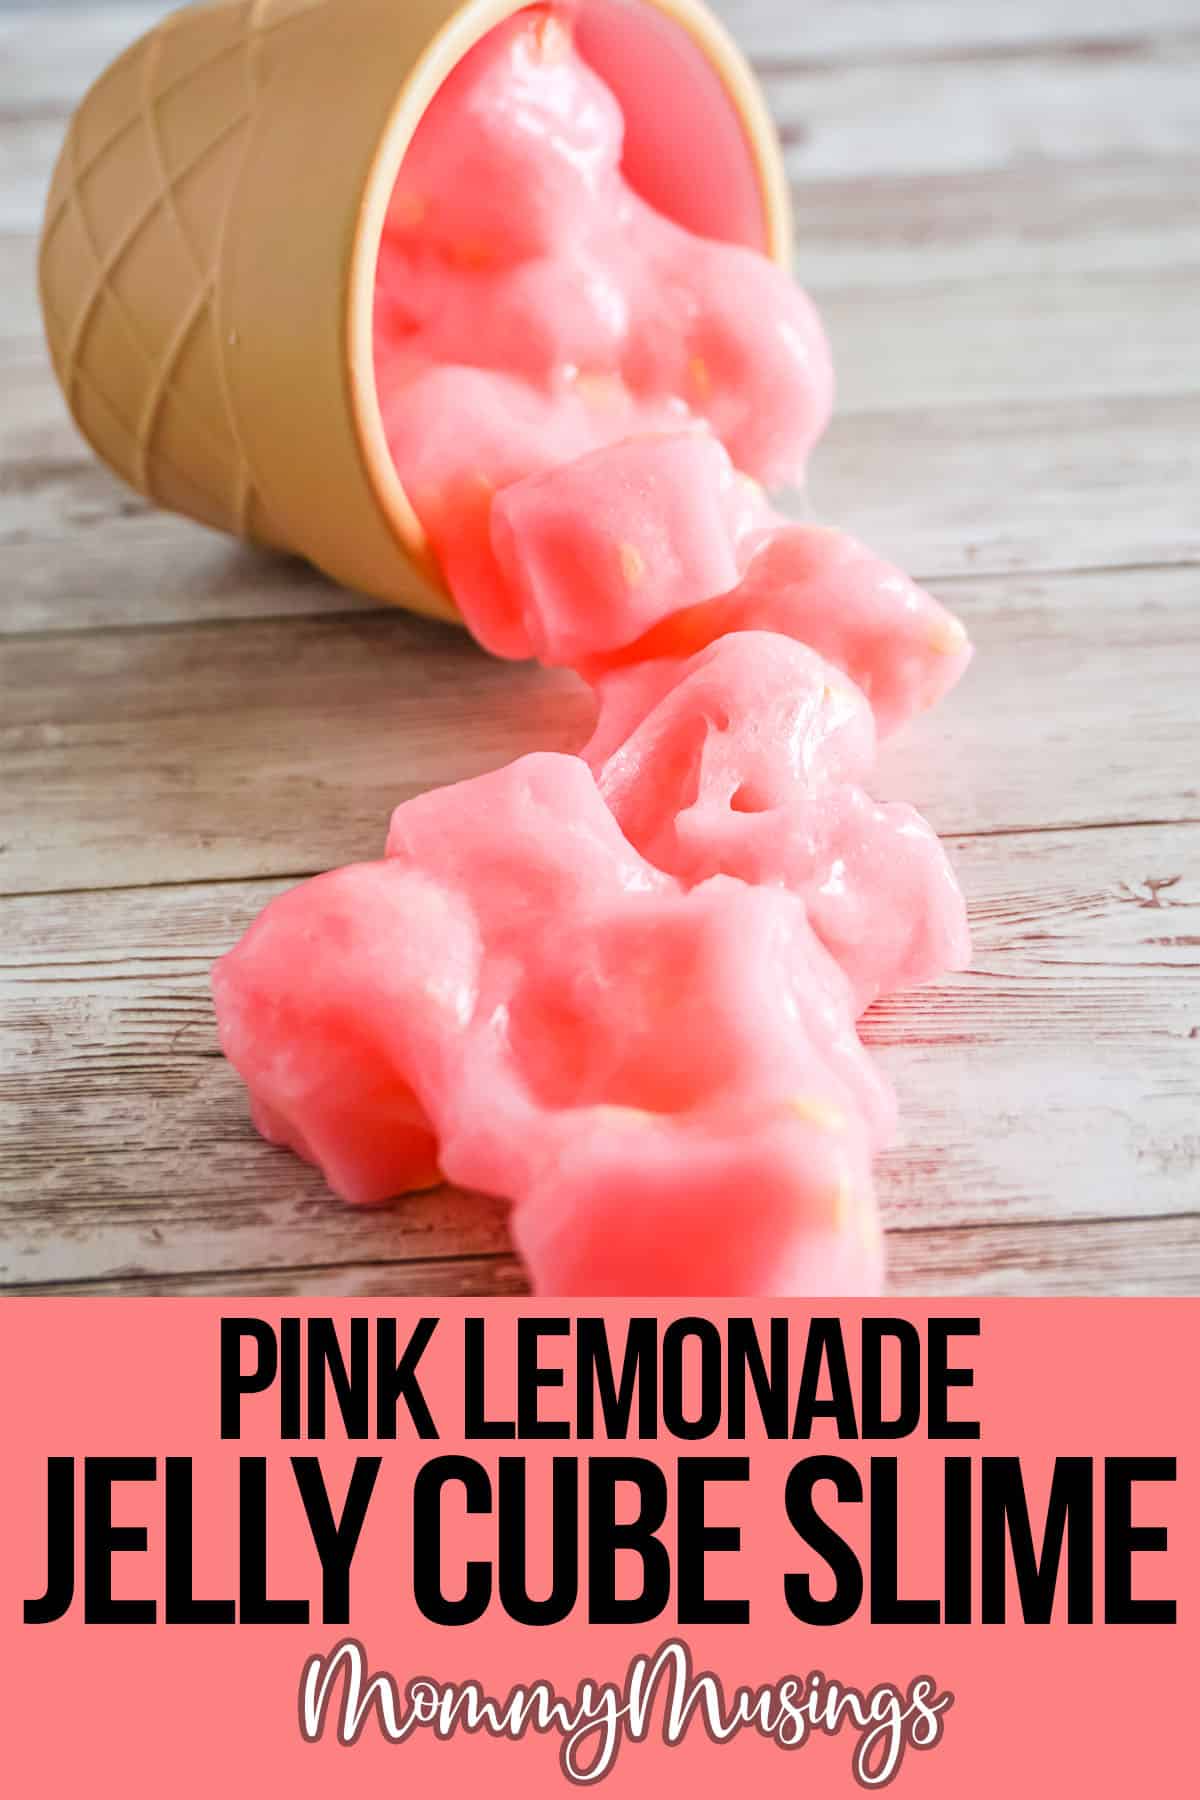 spilled Pink Jelly Cube Slime with text which reads Pink Lemonade Jelly Cube Slime